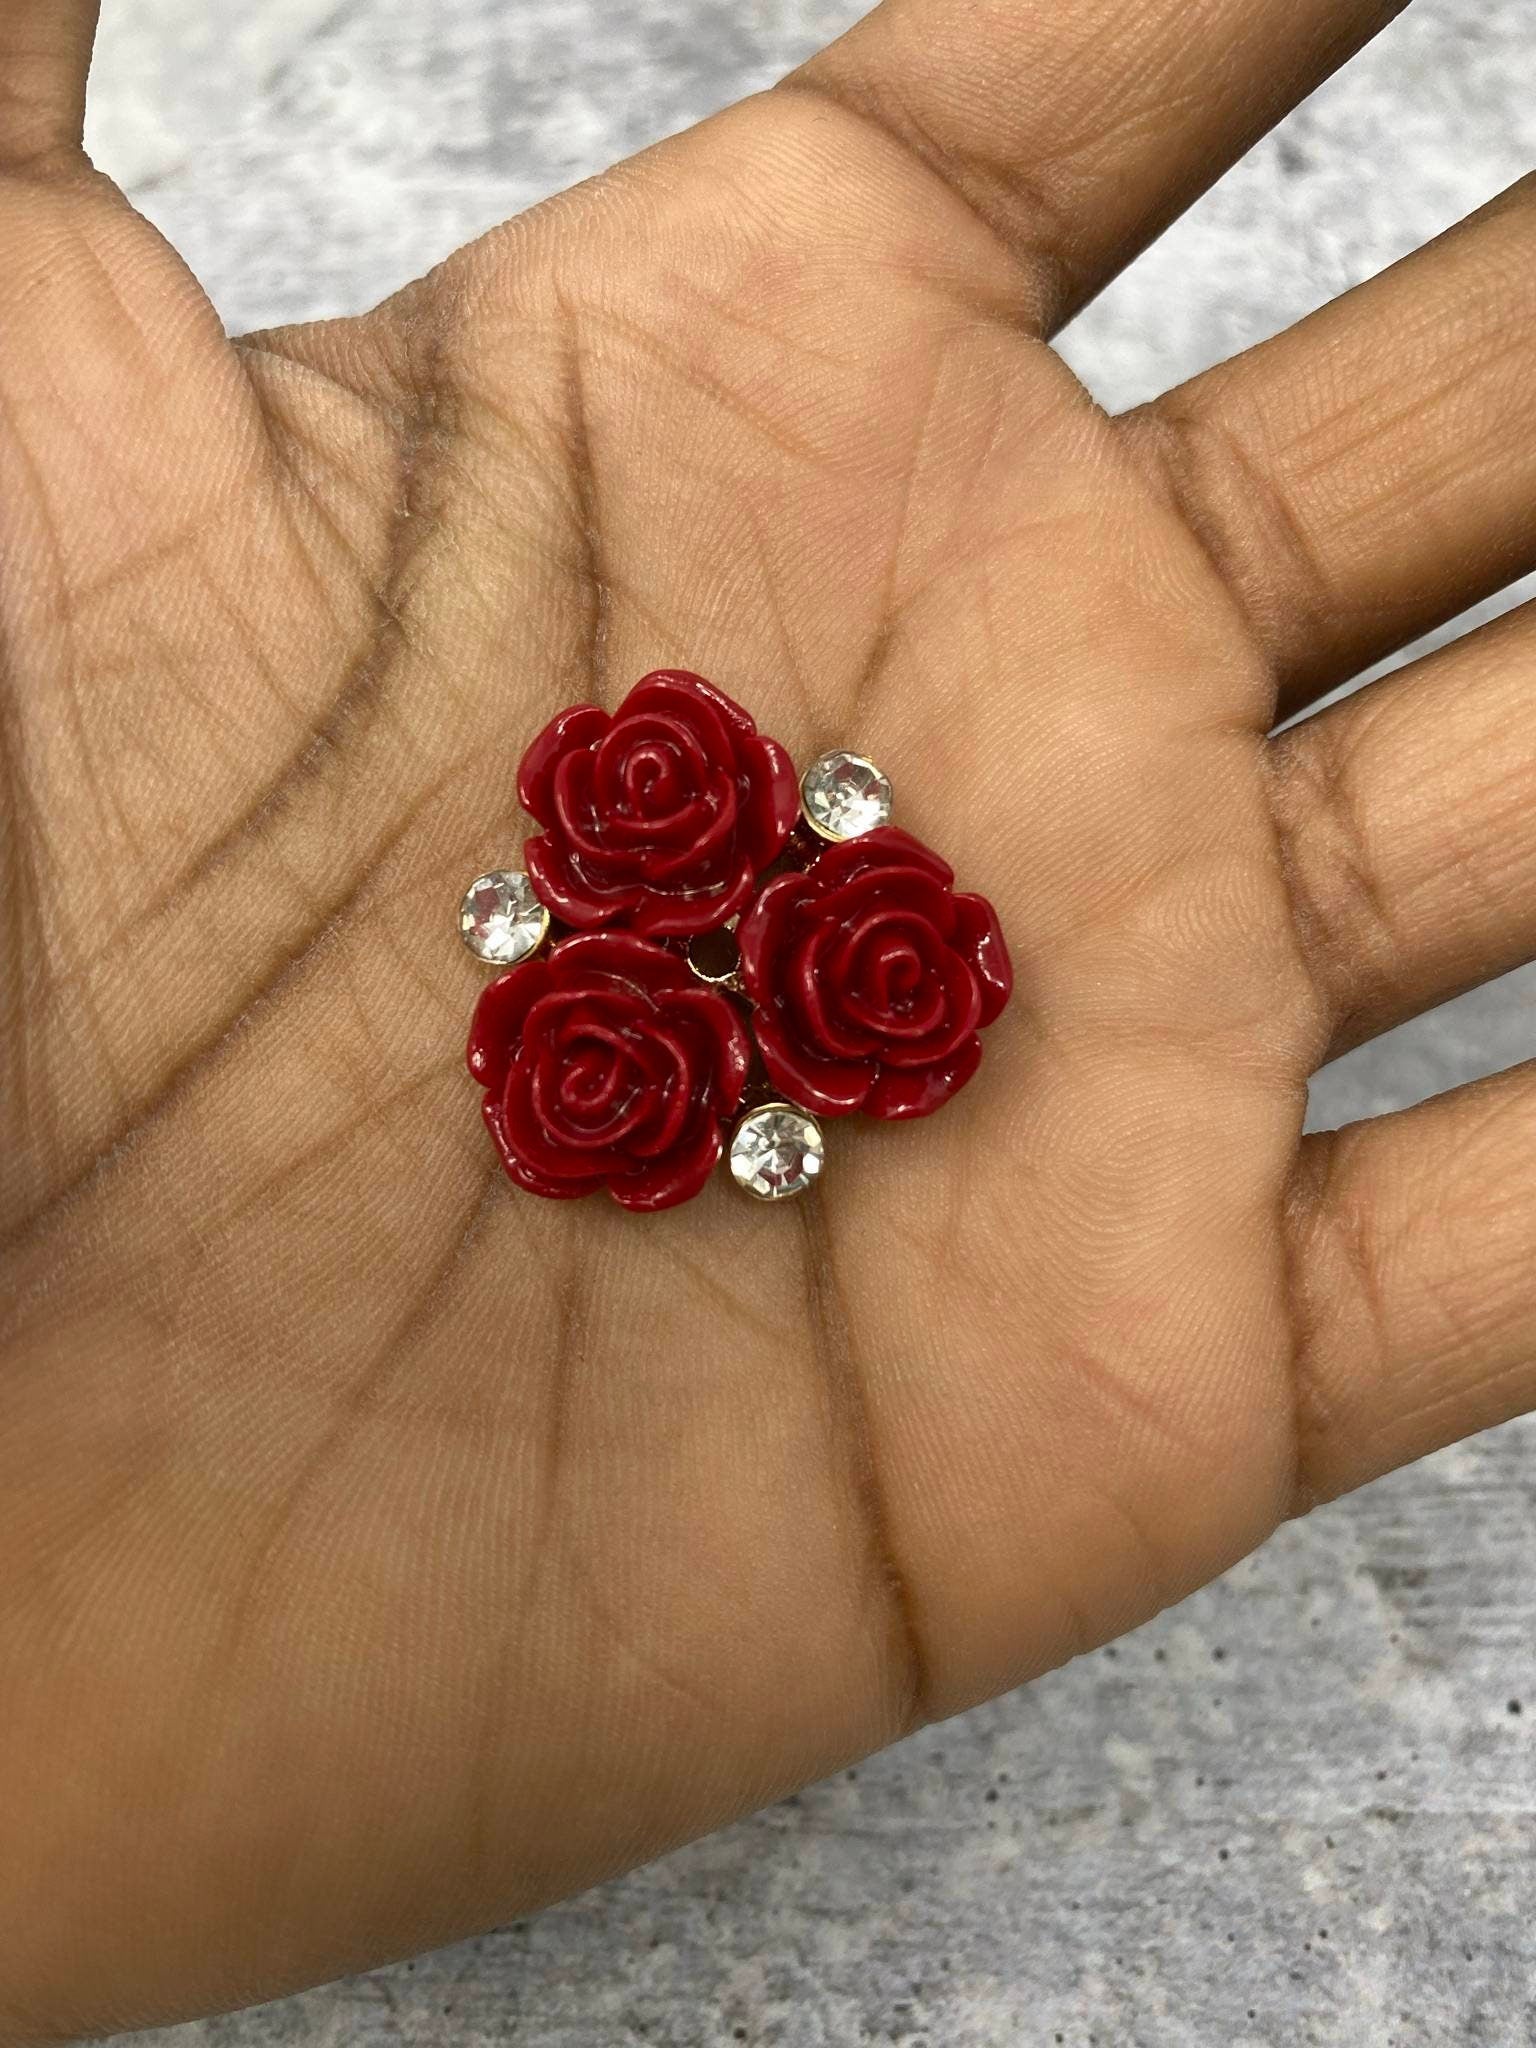 New, RED Resin Triple "Open Rose Bud" w/Bling, Flatback Charm, 1-pc Charm for CR O CS, Phone Cases, Sunglasses, Decor, and More! Size 2"